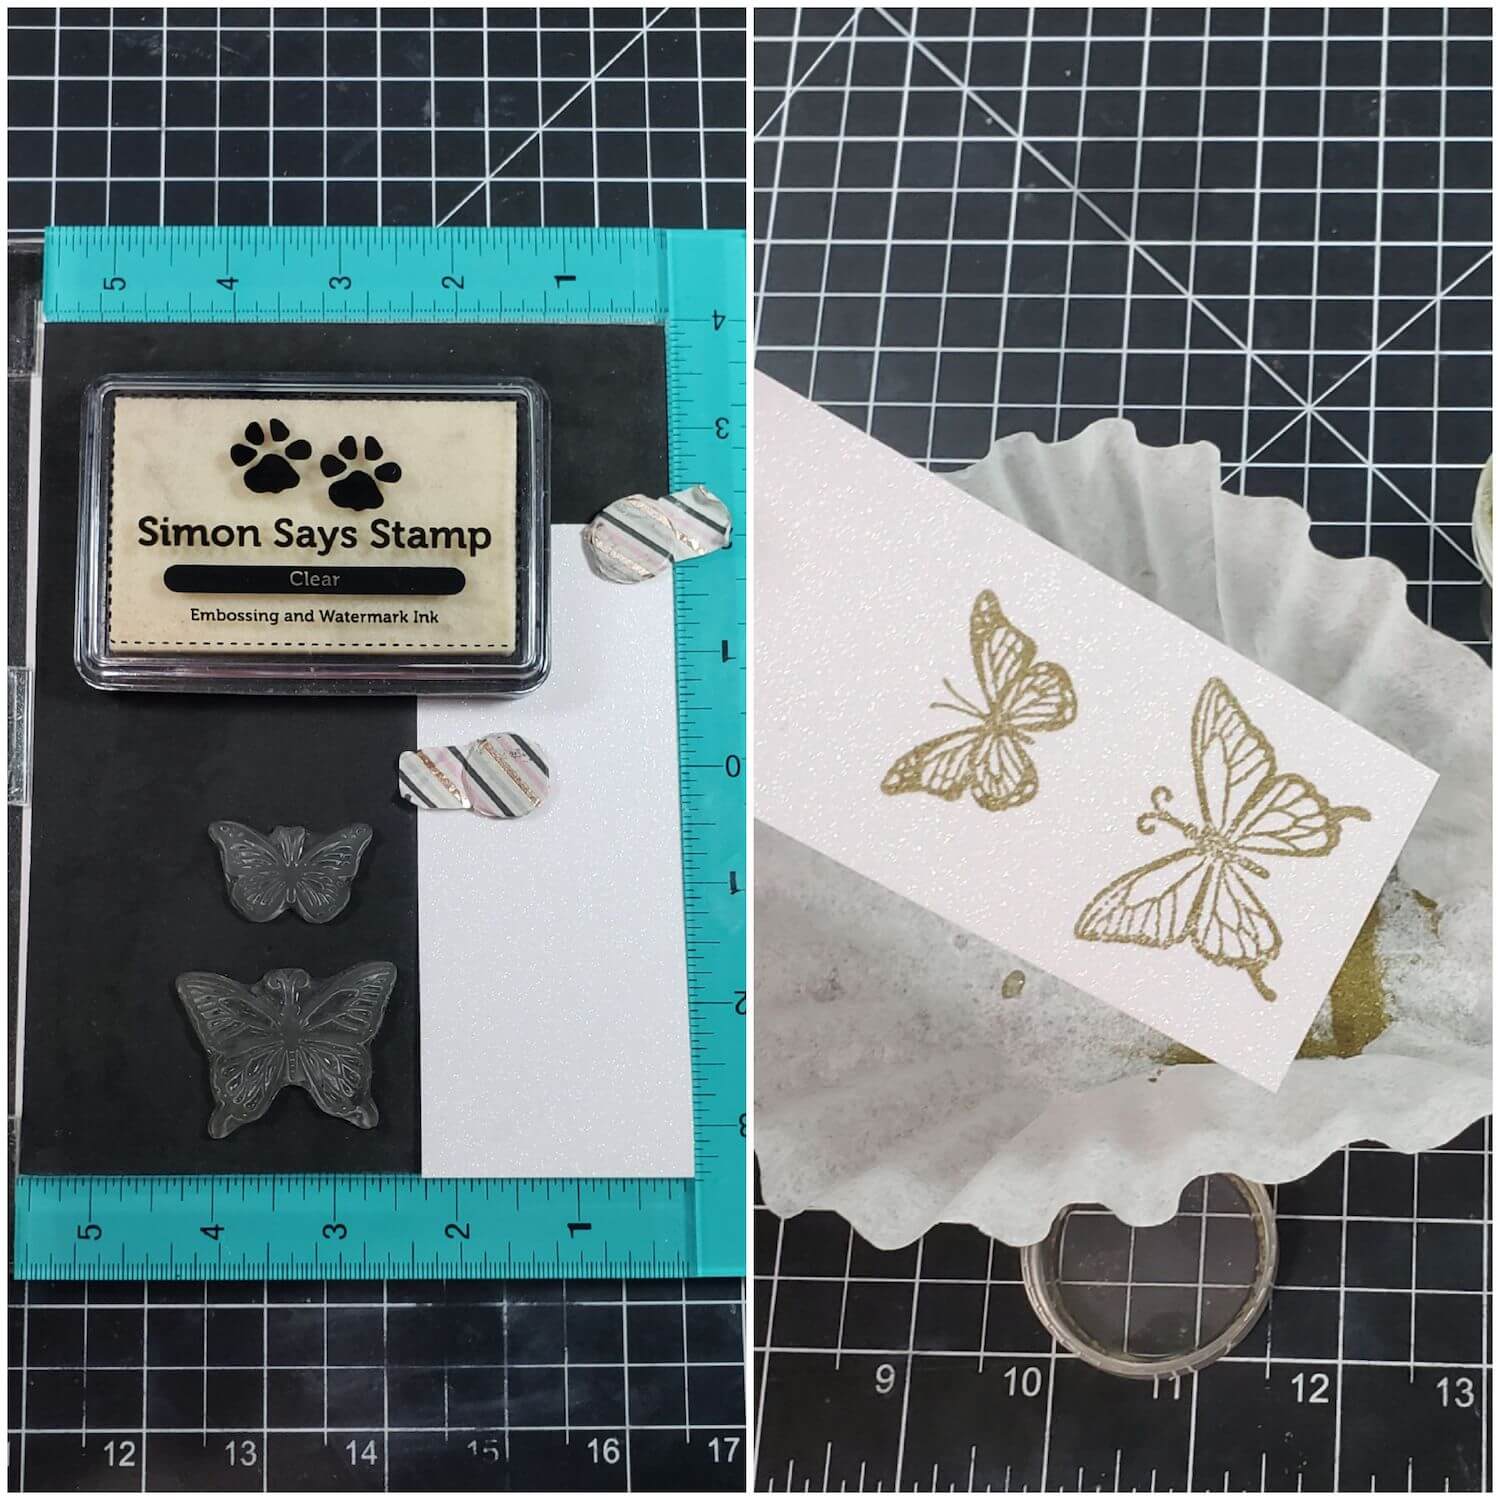 Stamping and embossing butterflies